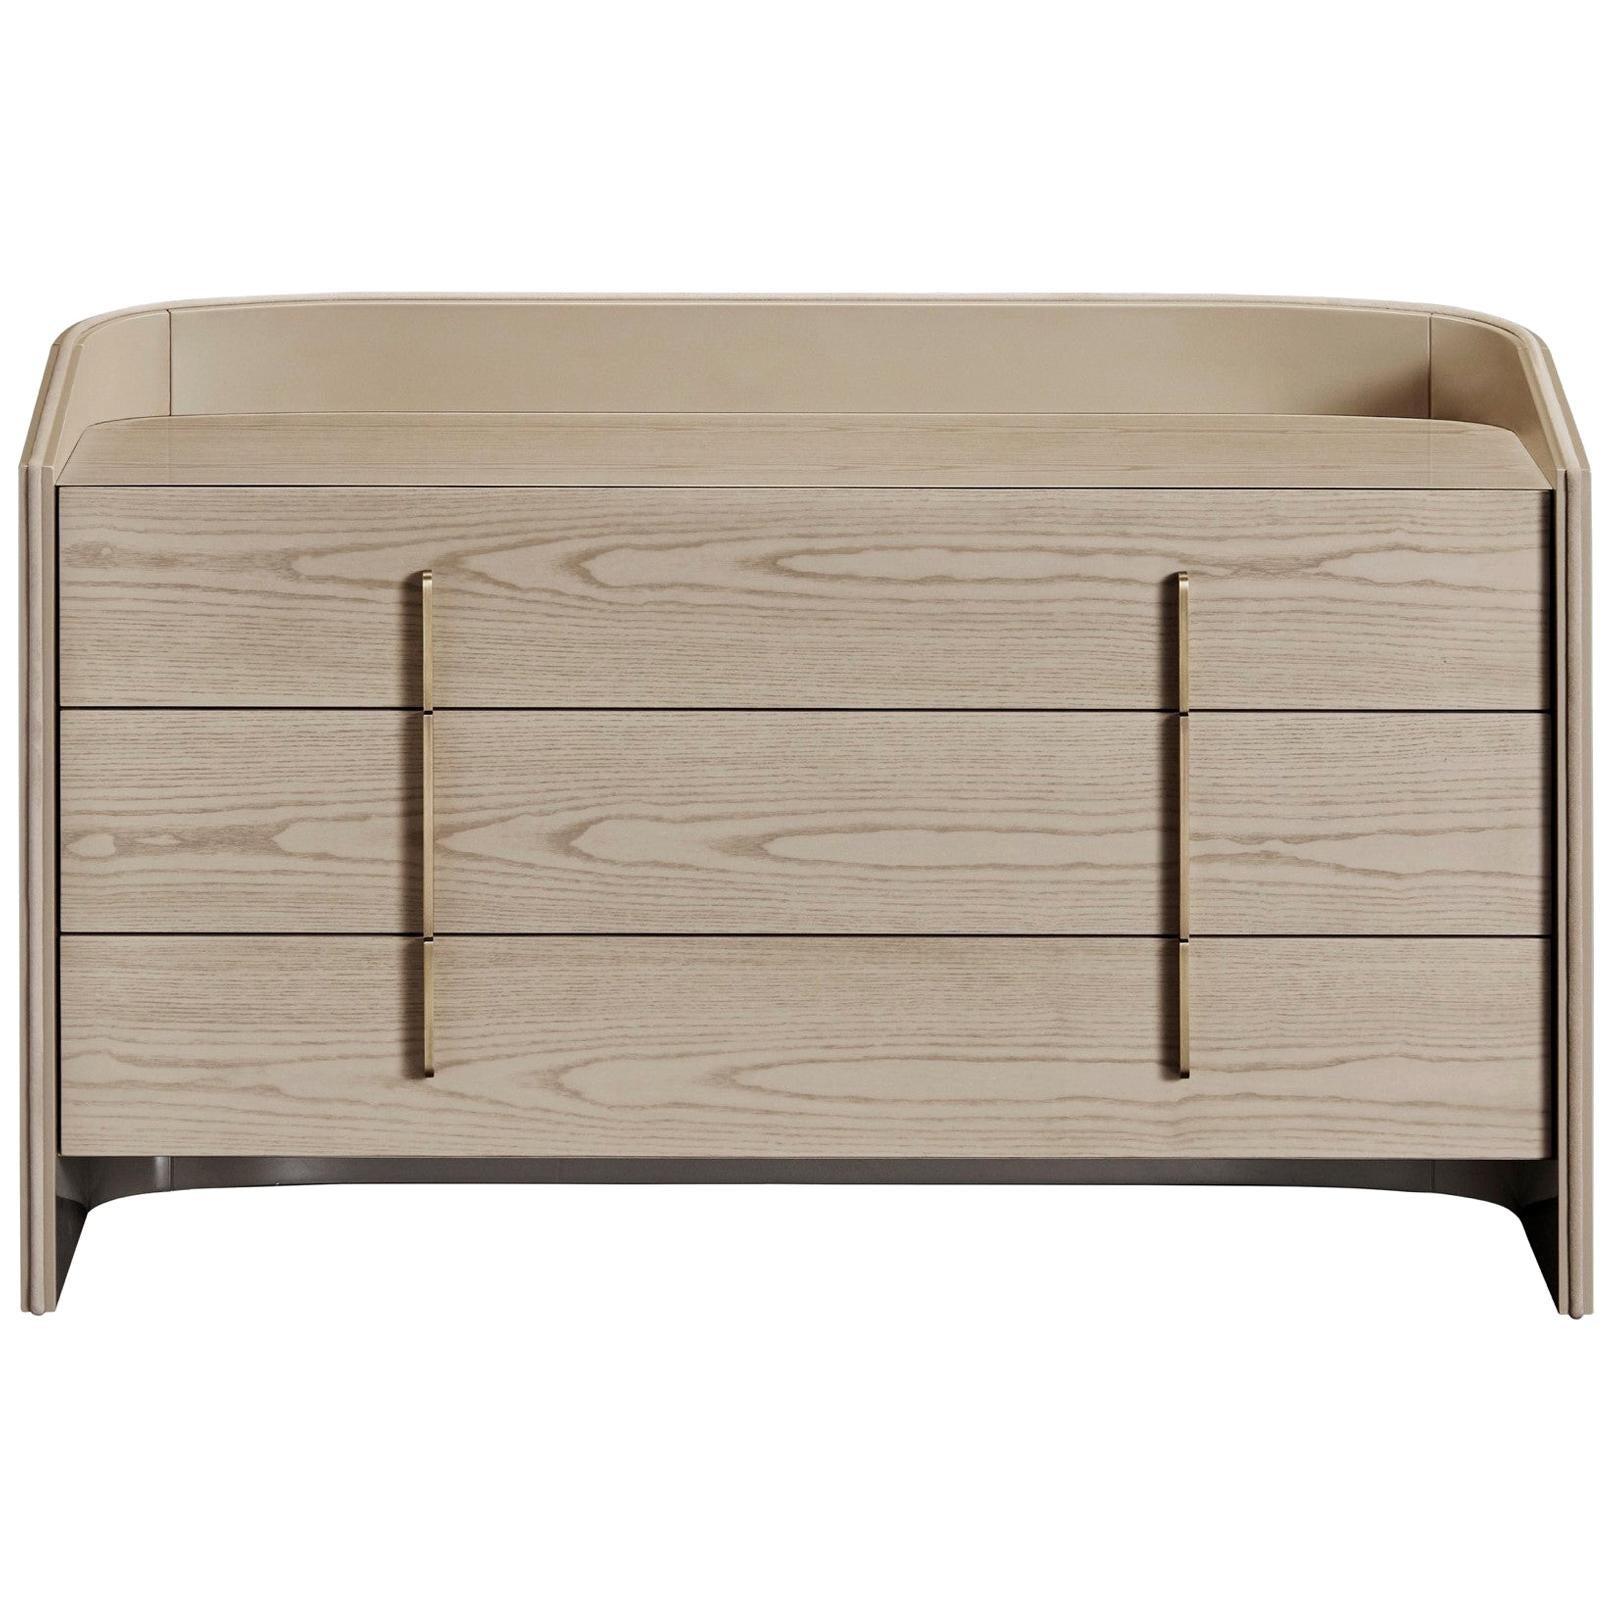 CORALINA Chest of Drawers in Ash Avelana and Antique Brass handles